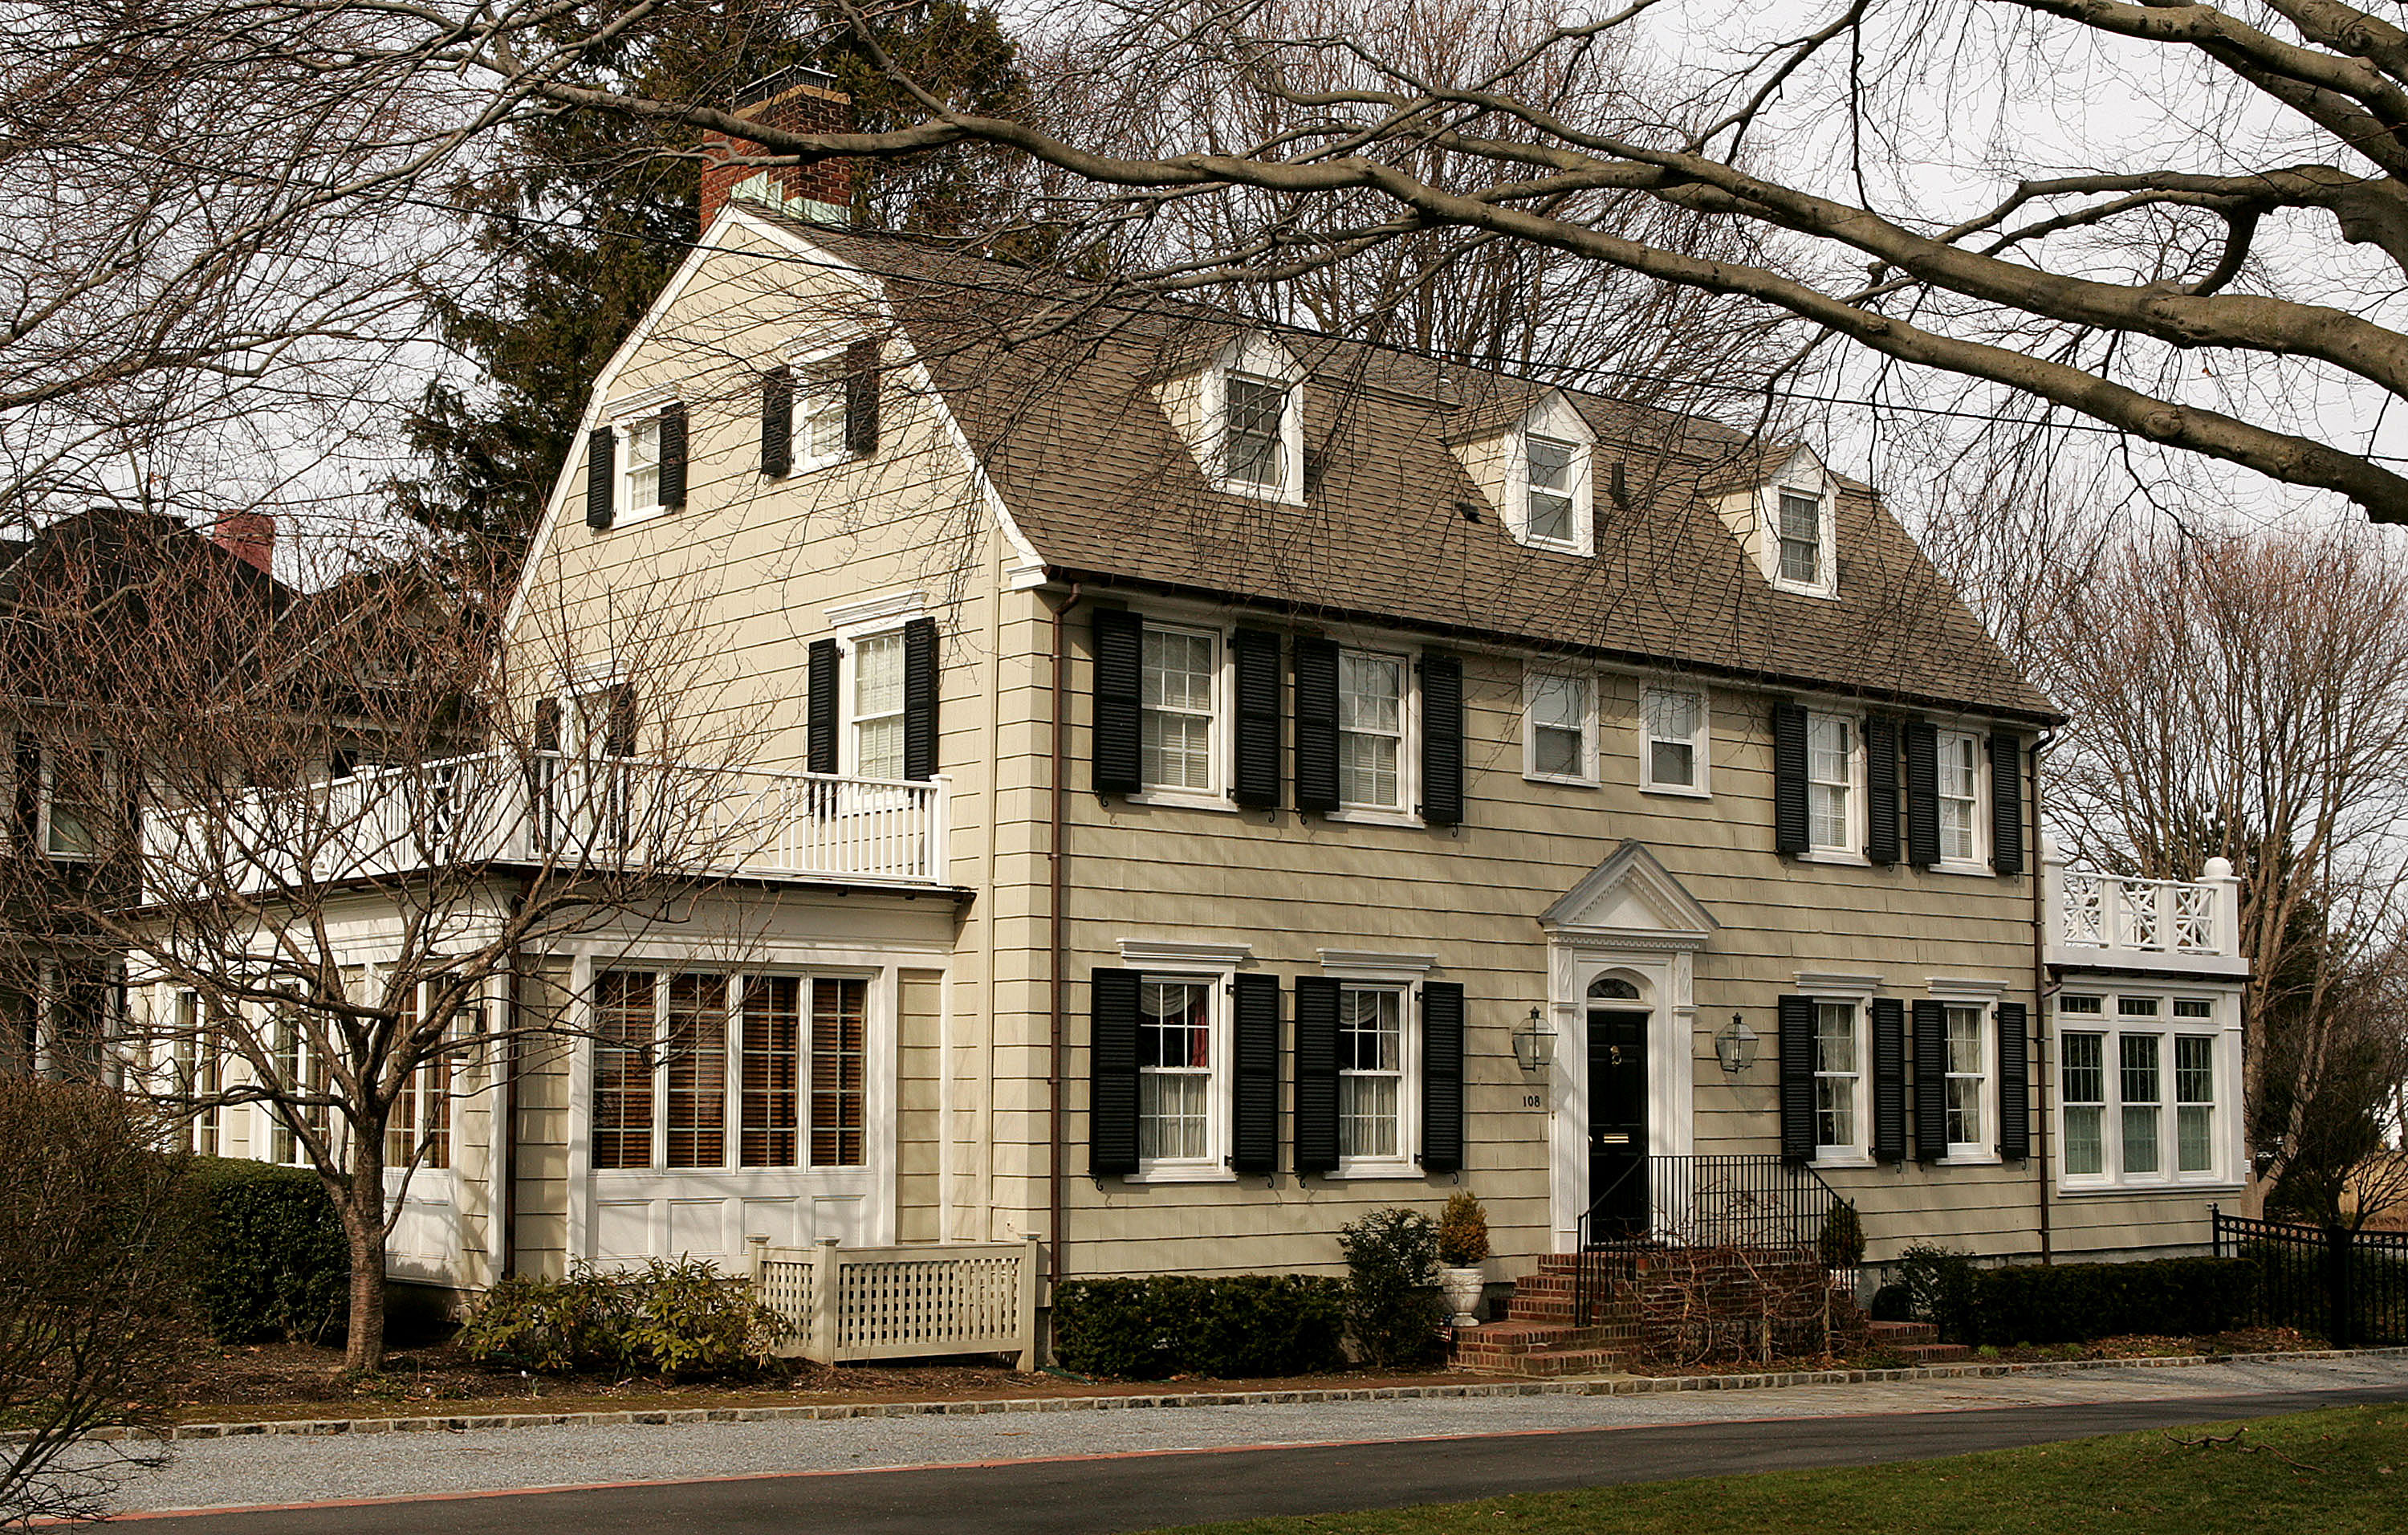 Real estate photograph of a house located at 112 Ocean Avenue in the town of Amityville, New York March 31, 2005. (Paul Hawthorne&mdash;Getty Images)